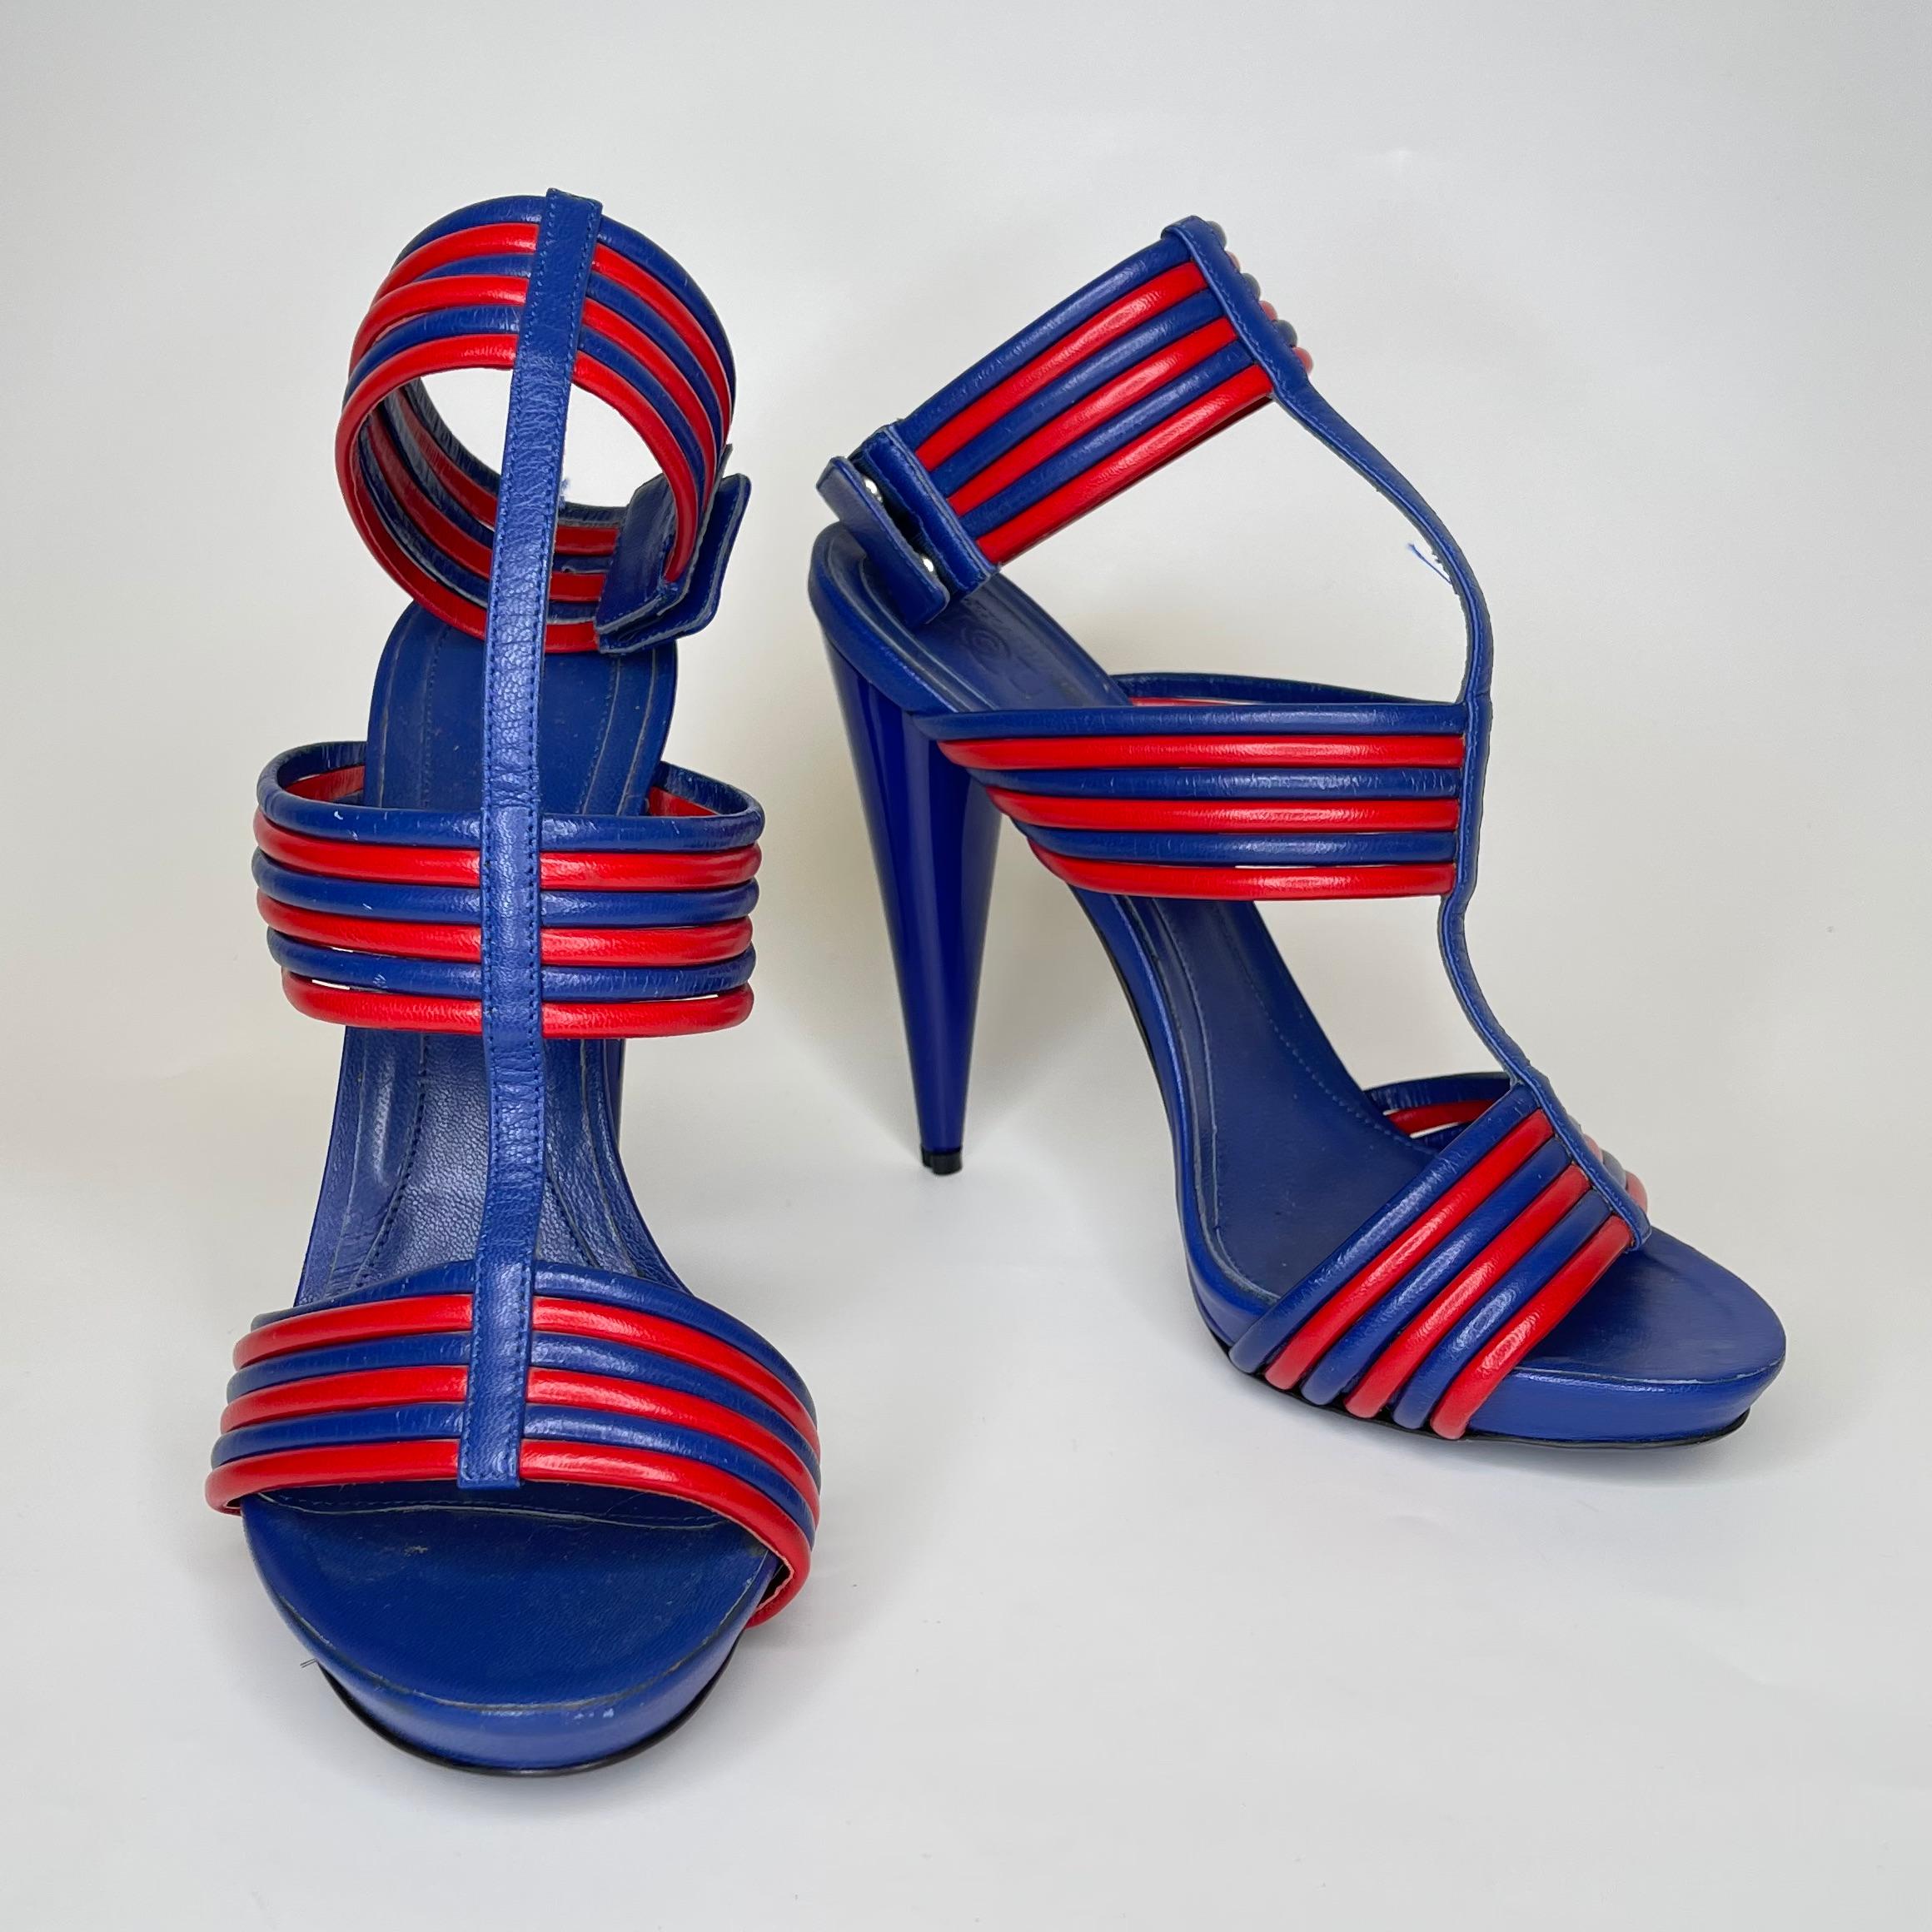 COLOR: Blue/red
MATERIAL: Leather
SIZE: 39.5 EU / 6.5 US
HEEL HEIGHT: 100 mm (4 in)
COMES WITH: Original box 
CONDITION: Good - light wear to the bottoms with scrapes, scuffs and marks. Faint marks throughout. Signs of leather aging to the